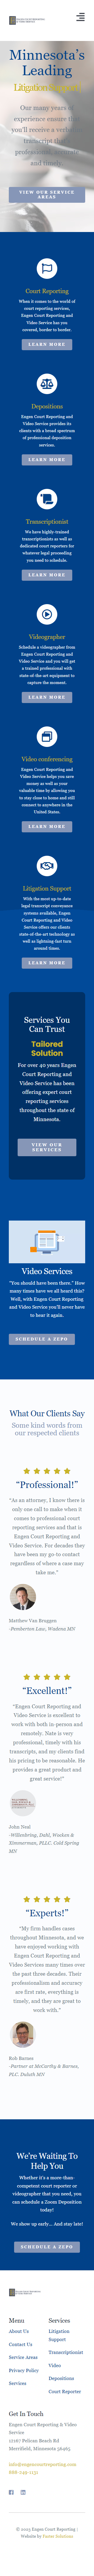 Engen Court Reporting - Mobile